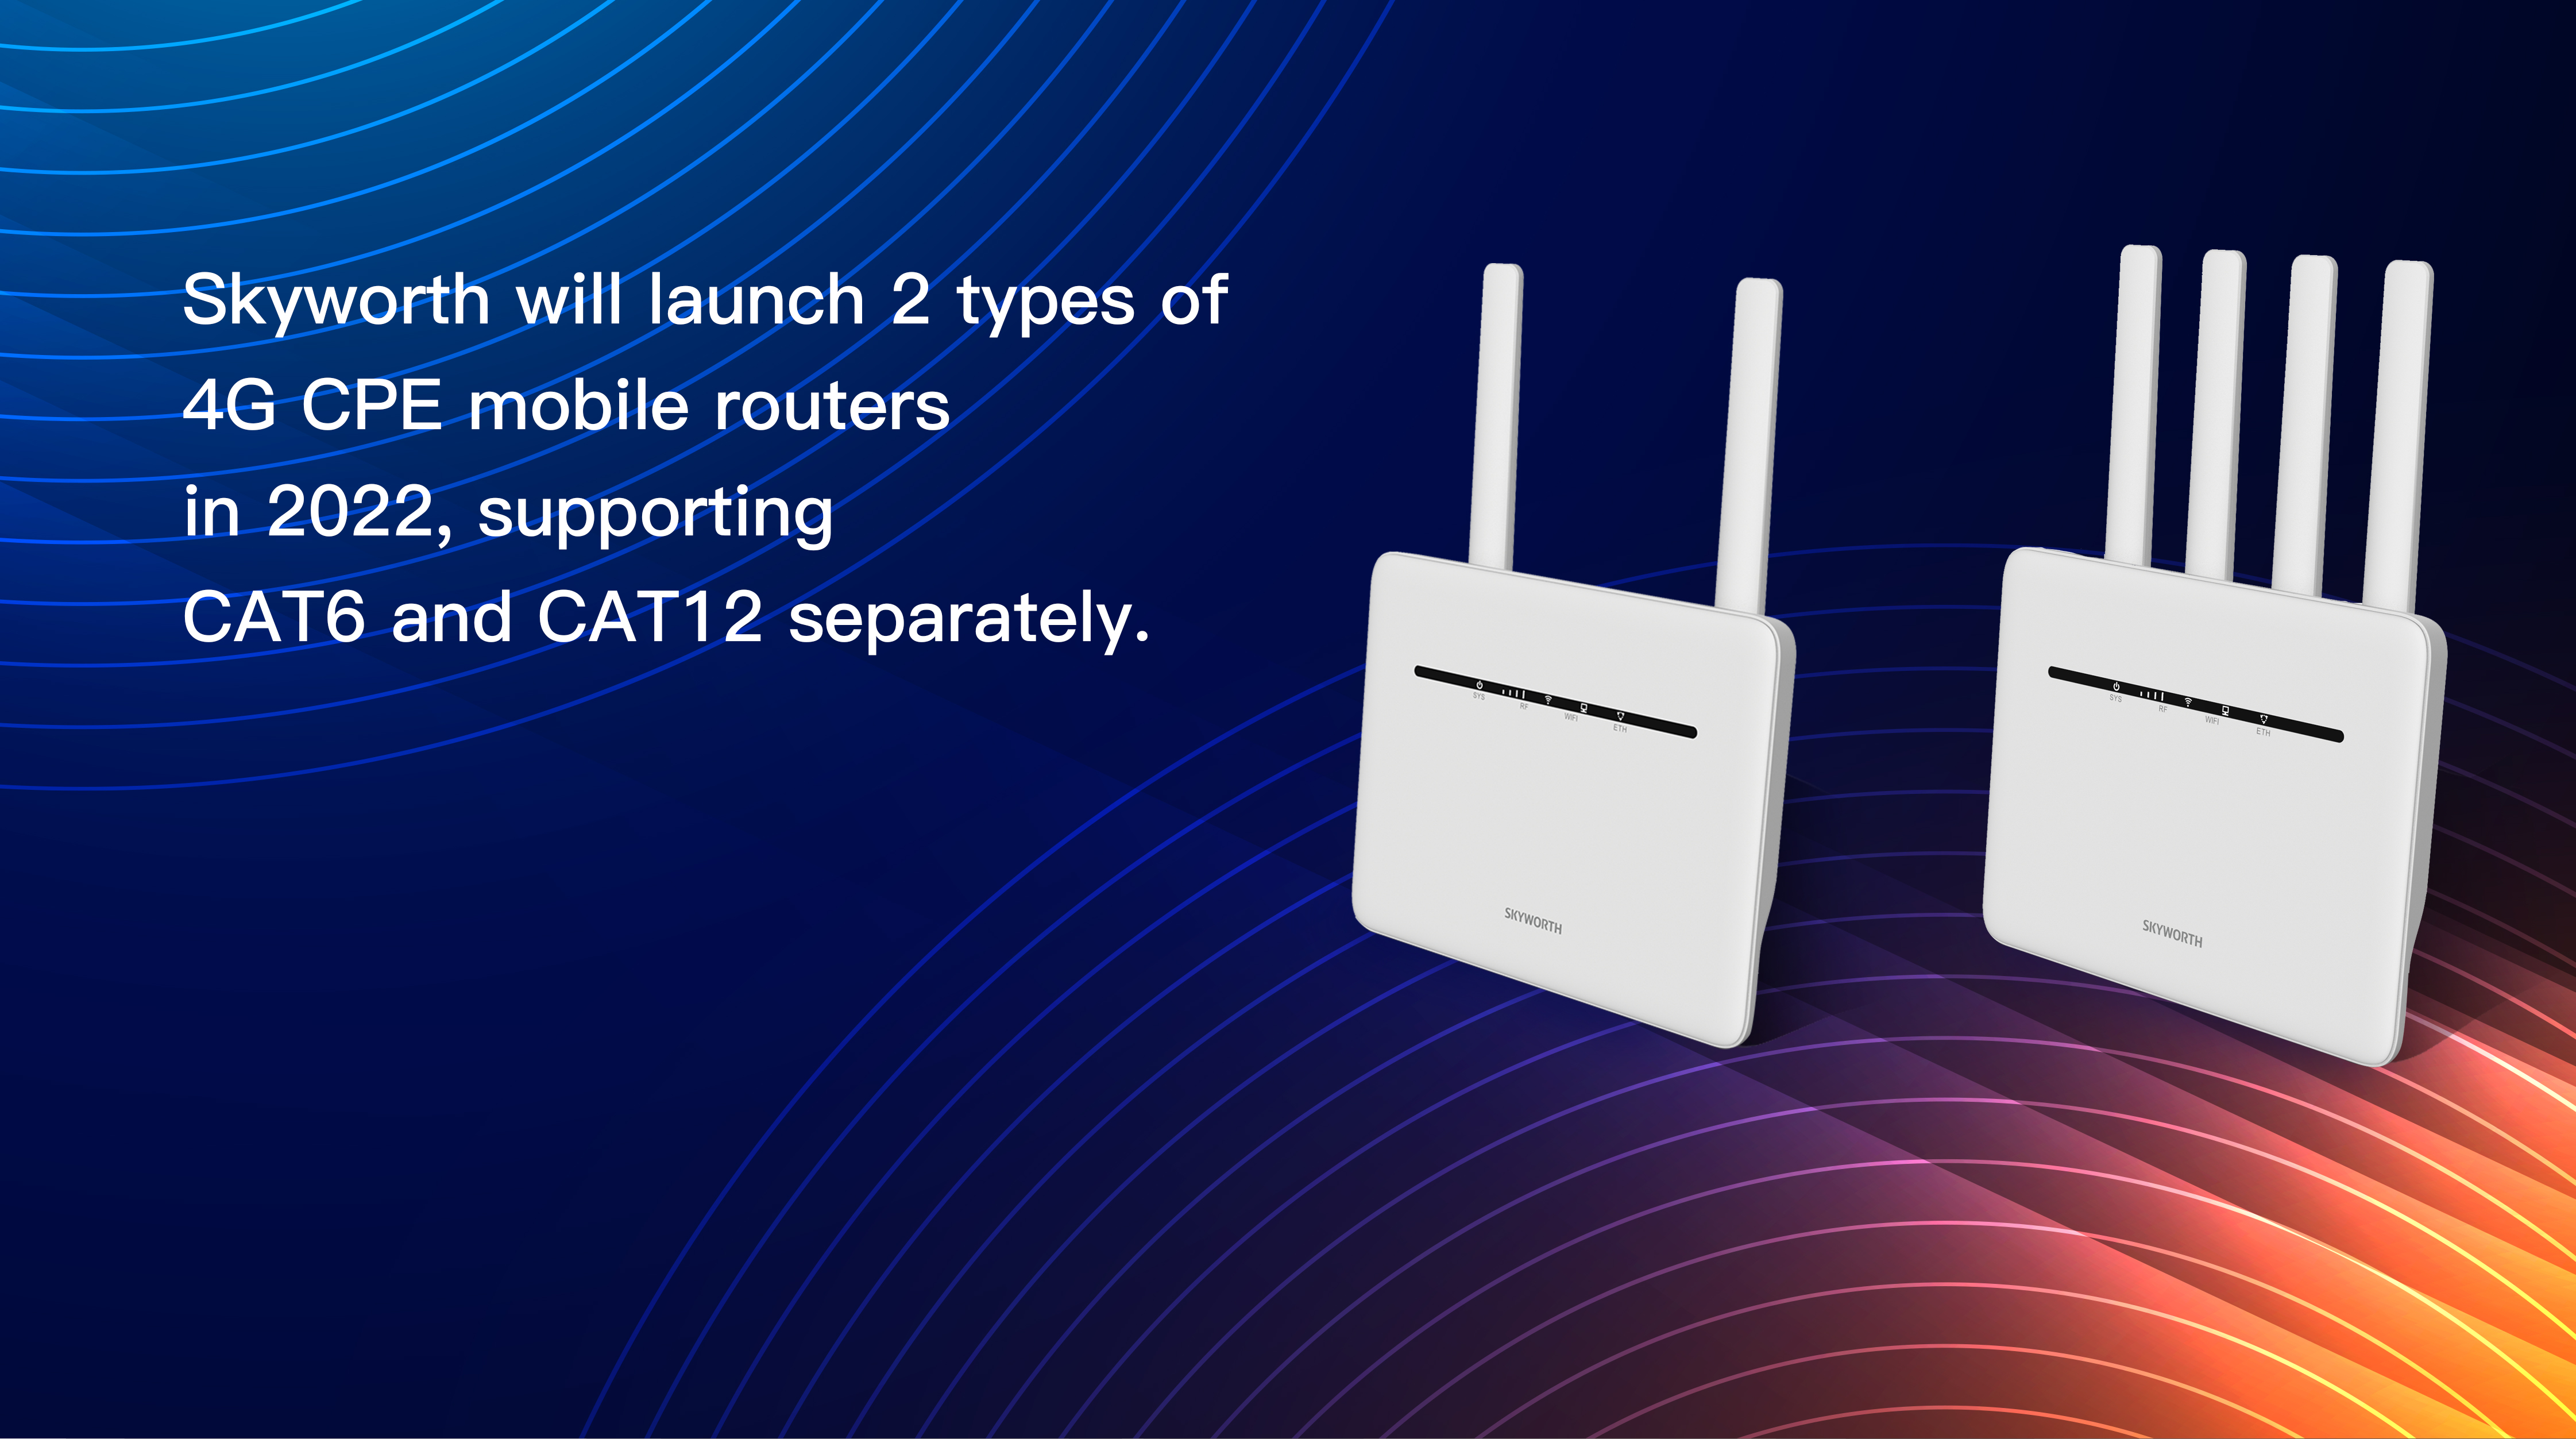 Skyworth will soon launch its first LTE Home Gateway with AC1200 Wi-Fi Router